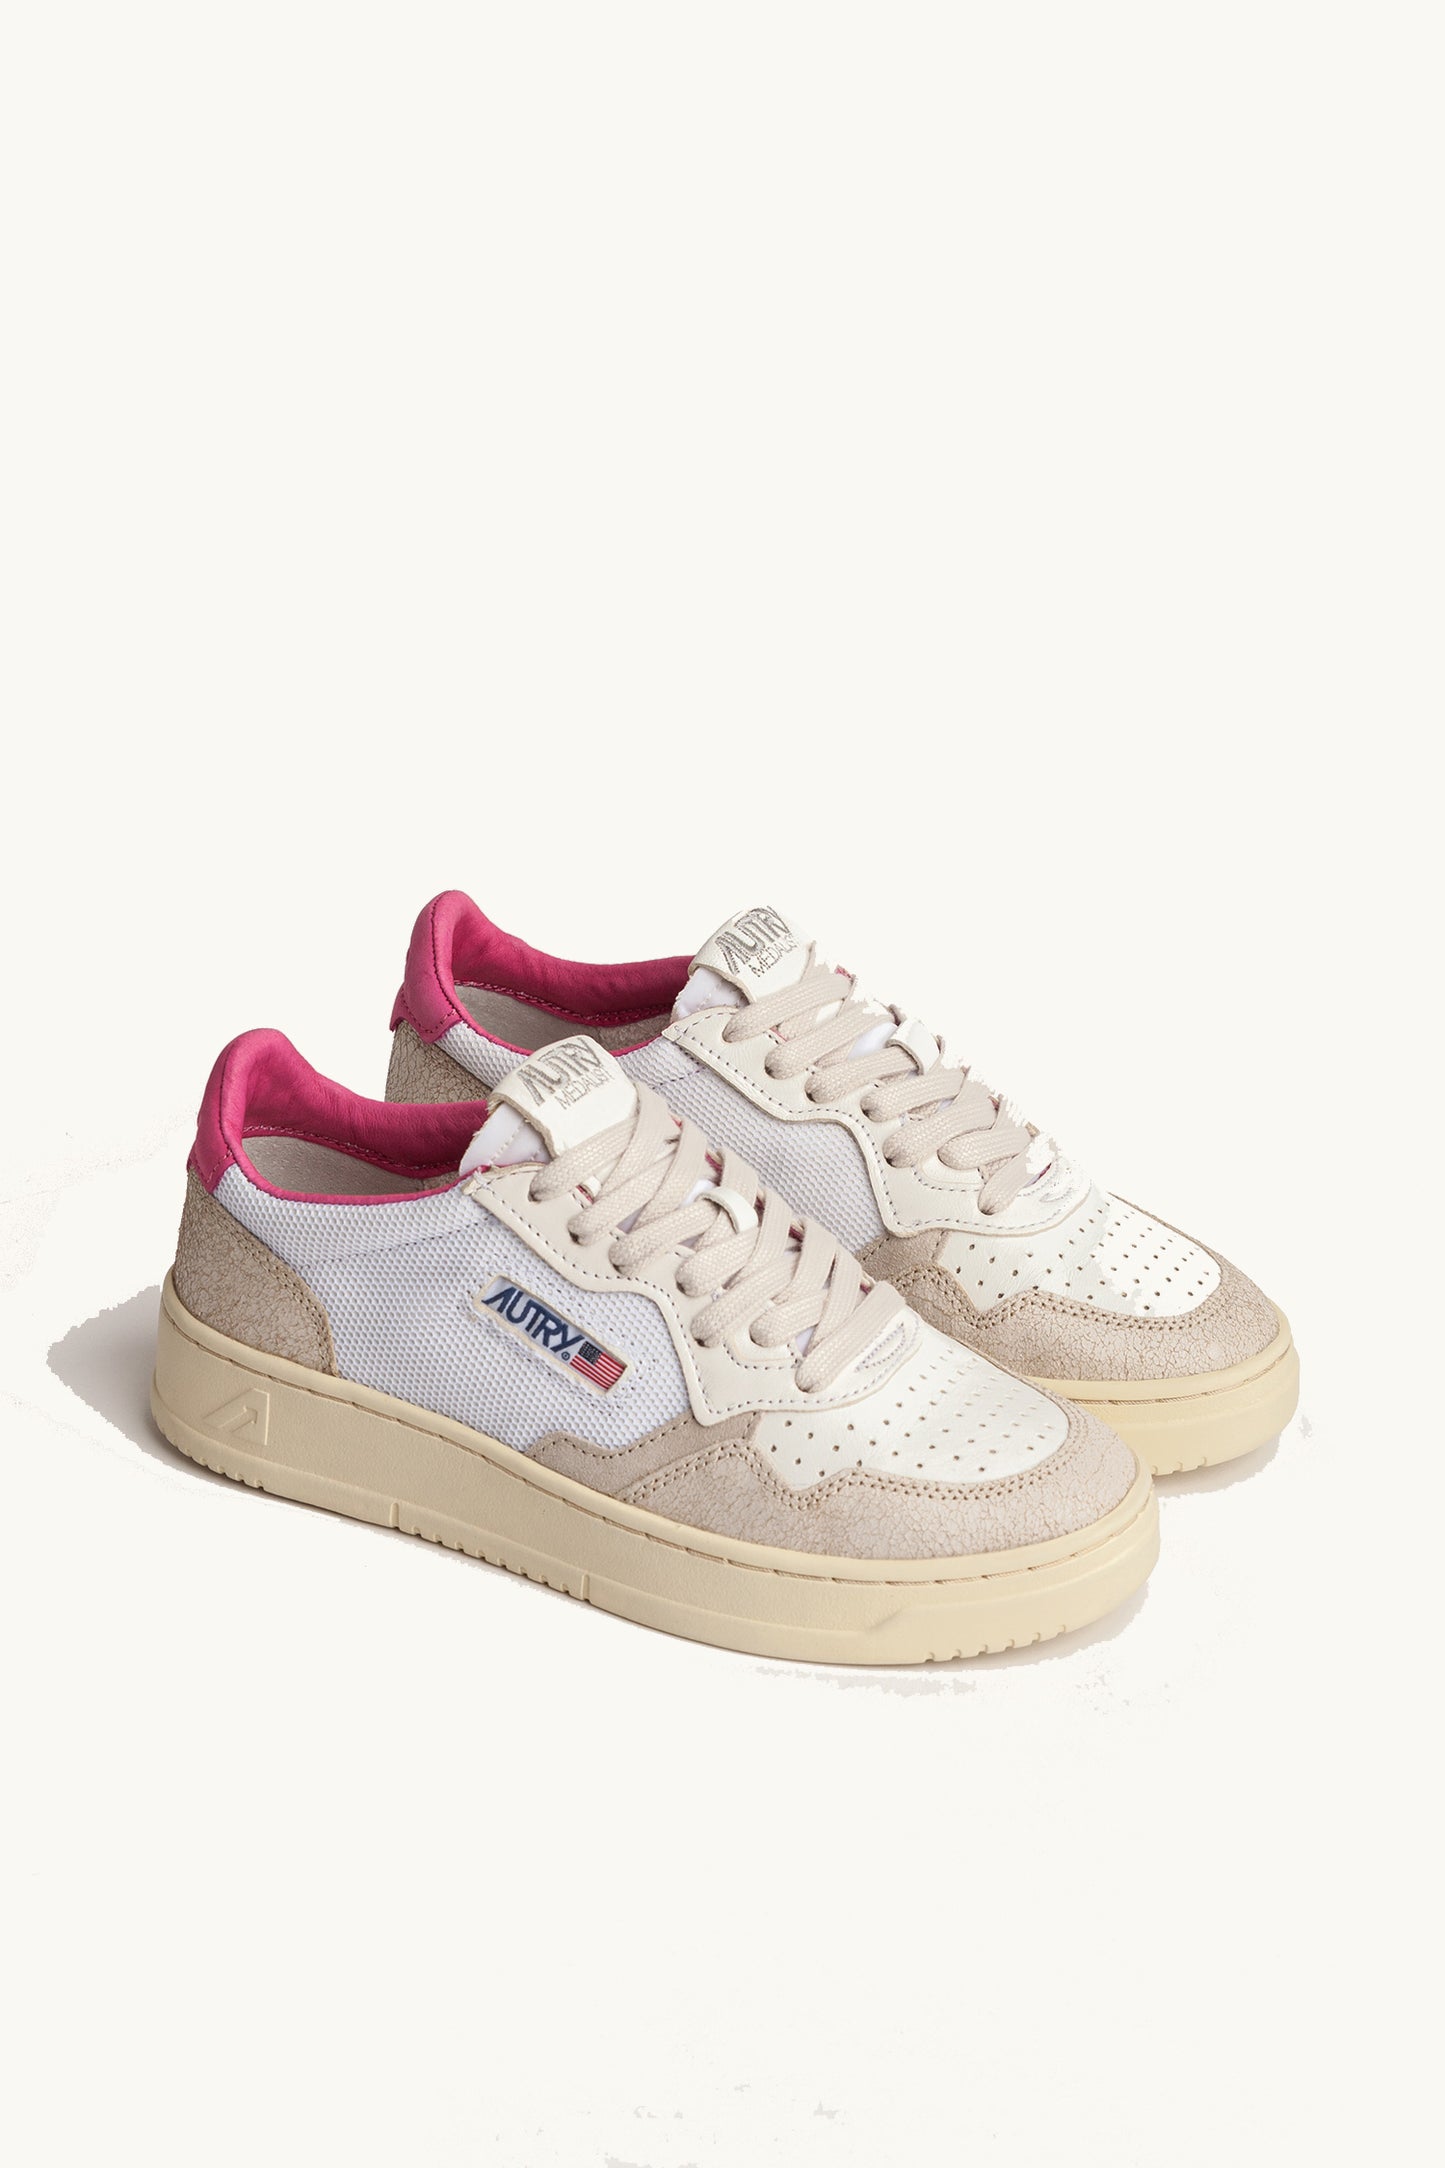 MEDALIST LOW SUEDE/LEATHER WHITE/MAUVE LS64